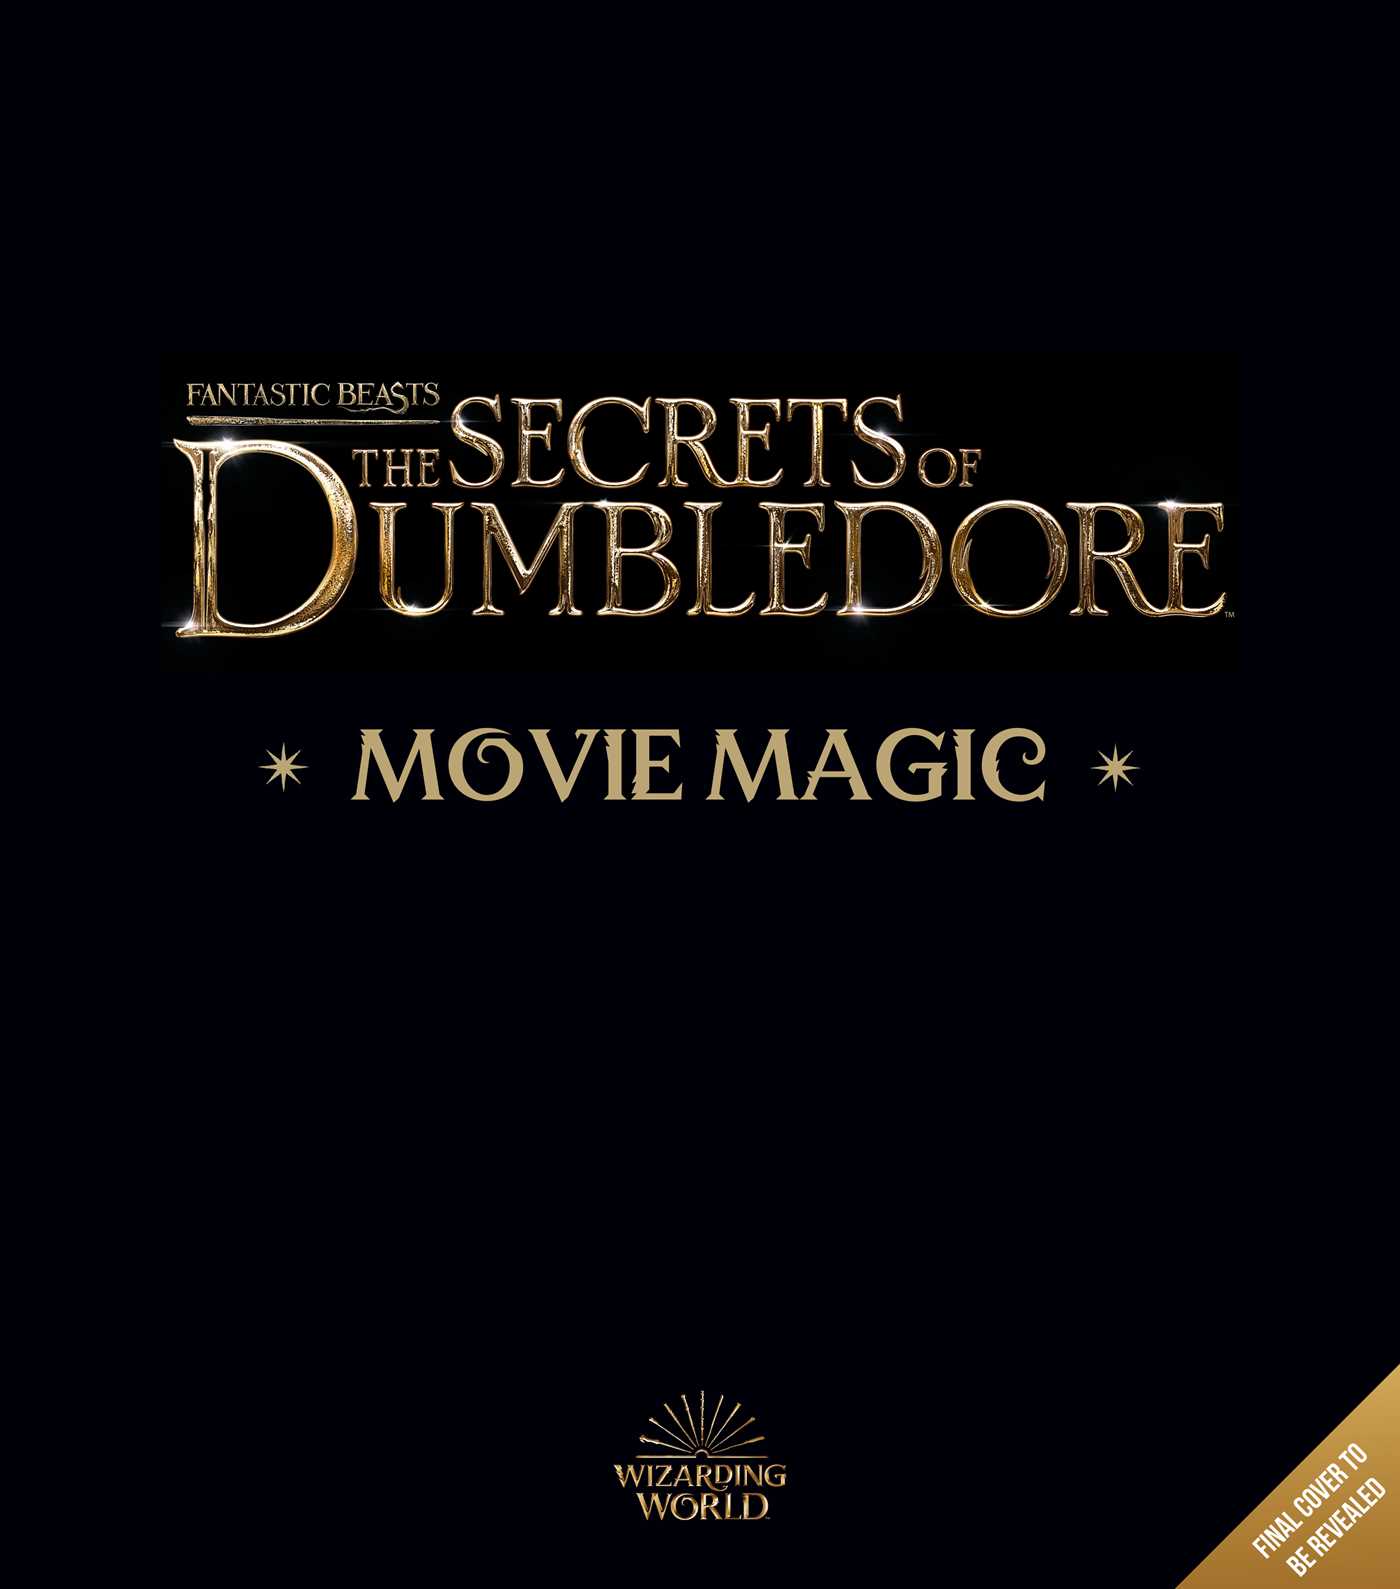 Fantastic Beasts: The Secrets of Dumbledore: Movie Magic. Book by Jody Revenson. Official Publisher Page. Simon & Schuster